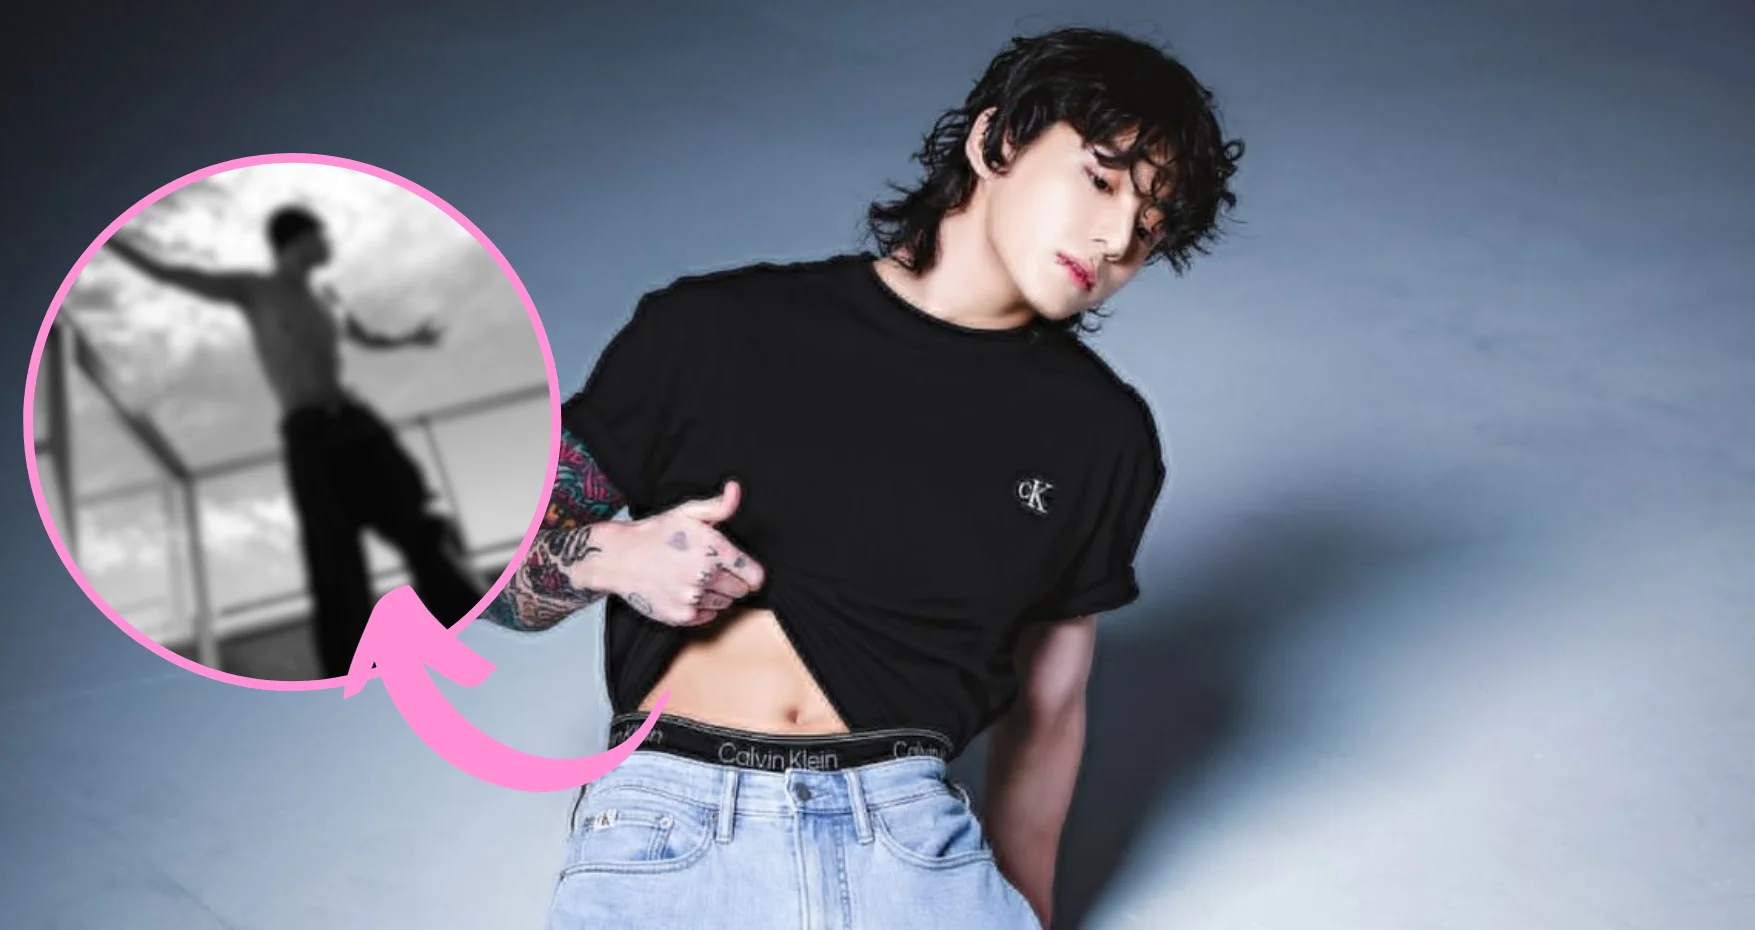 BTS's Jungkook Takes TikTok By Storm with Latest Dance Video